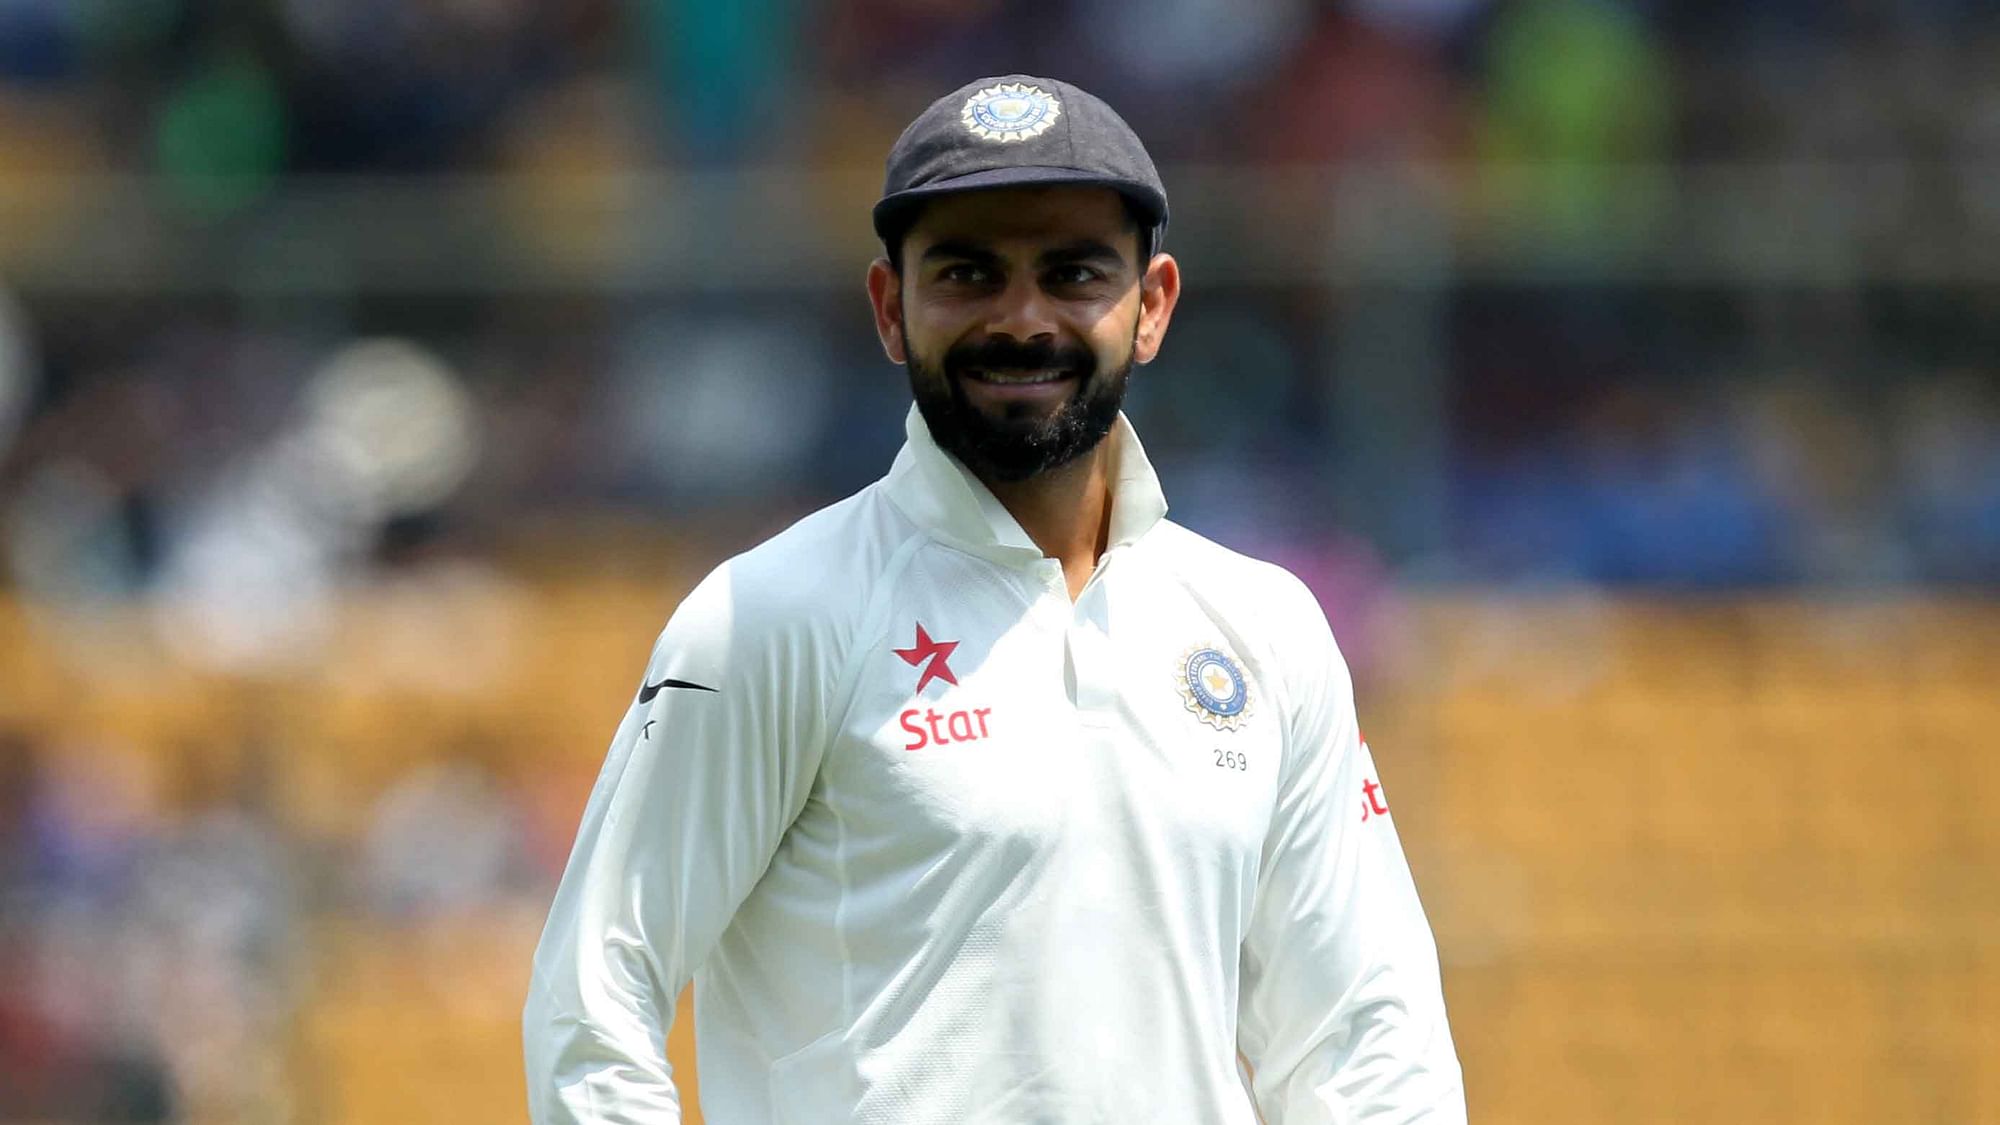 Virat Kohli captain of India during day two of the second test match between India and Australia. (Photo: BCCI)